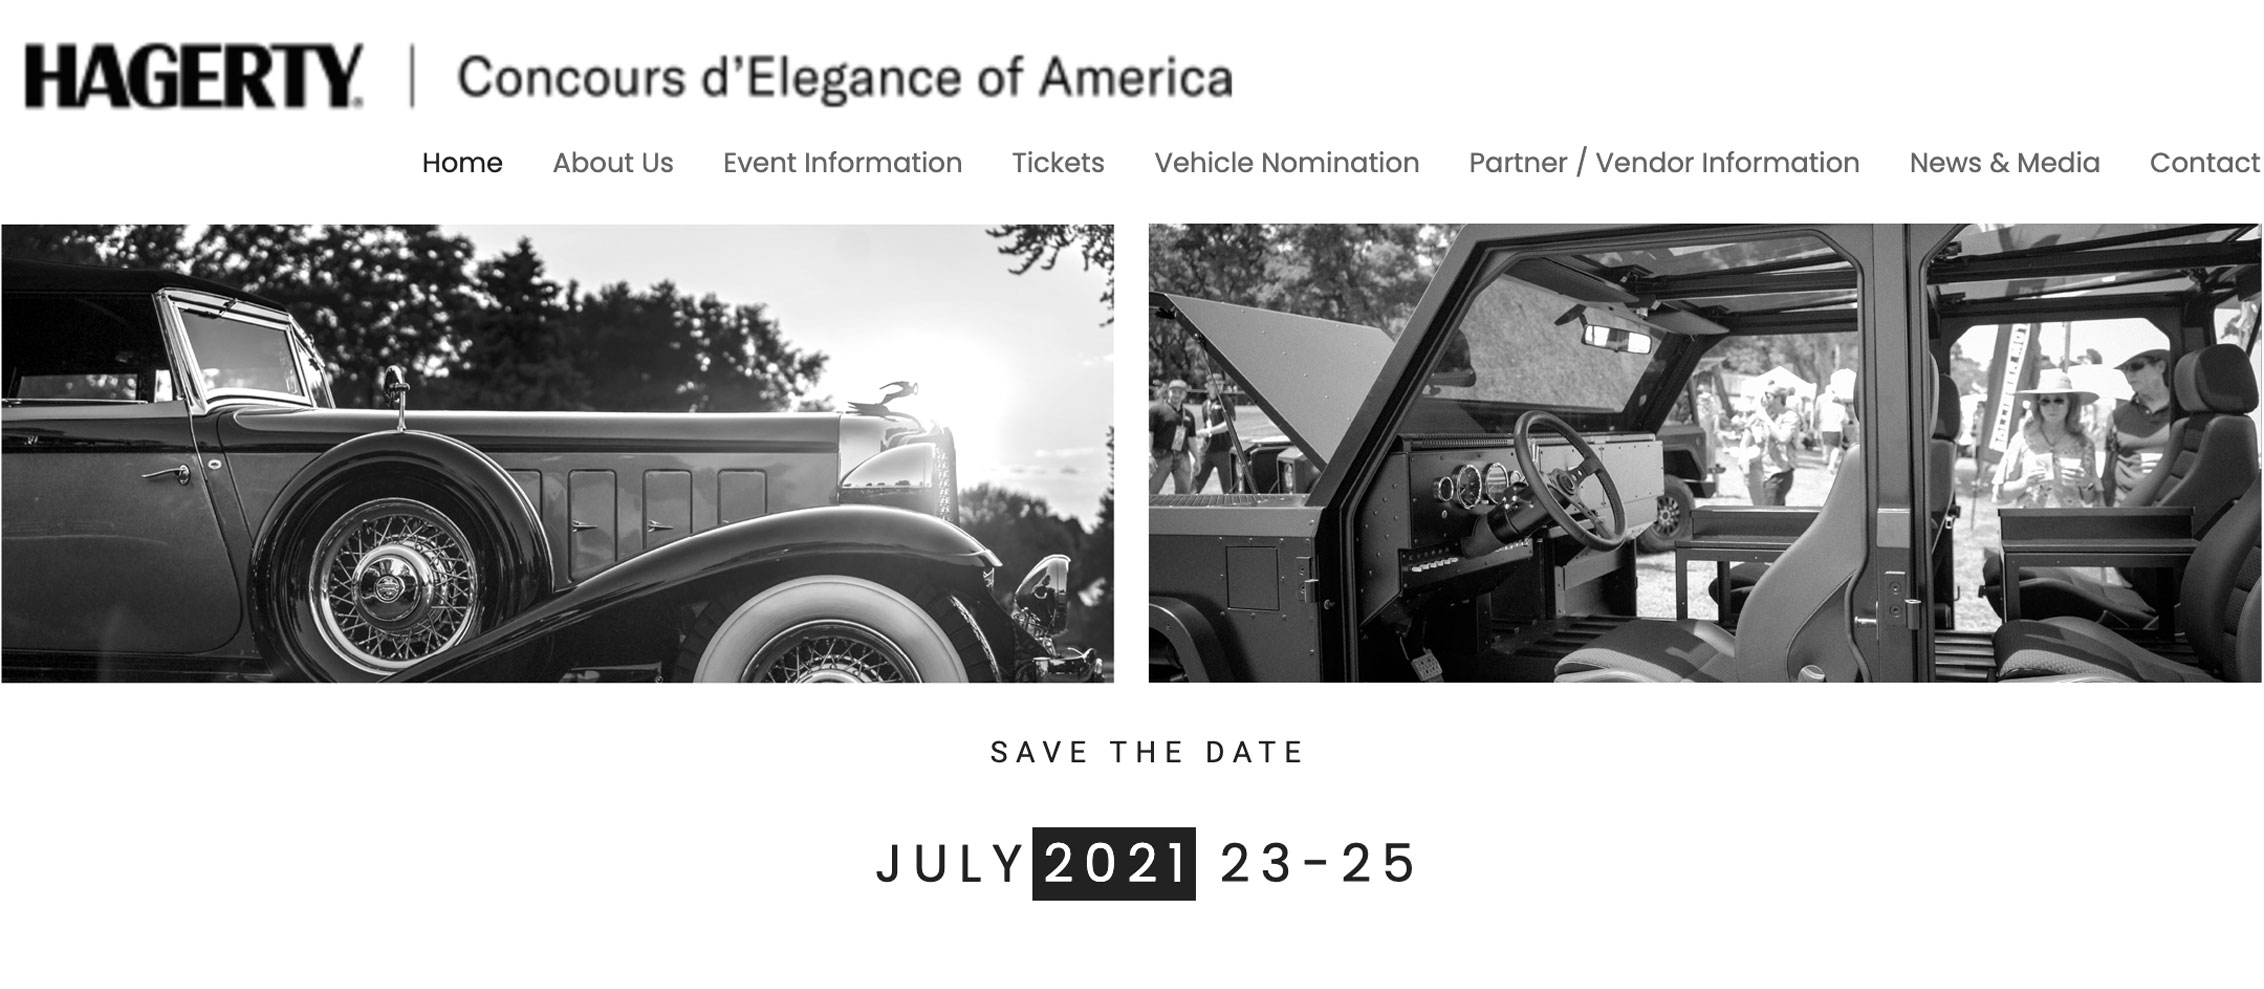 Announcement image for the Concours d'Elegance of America July 23 through 25, 2021